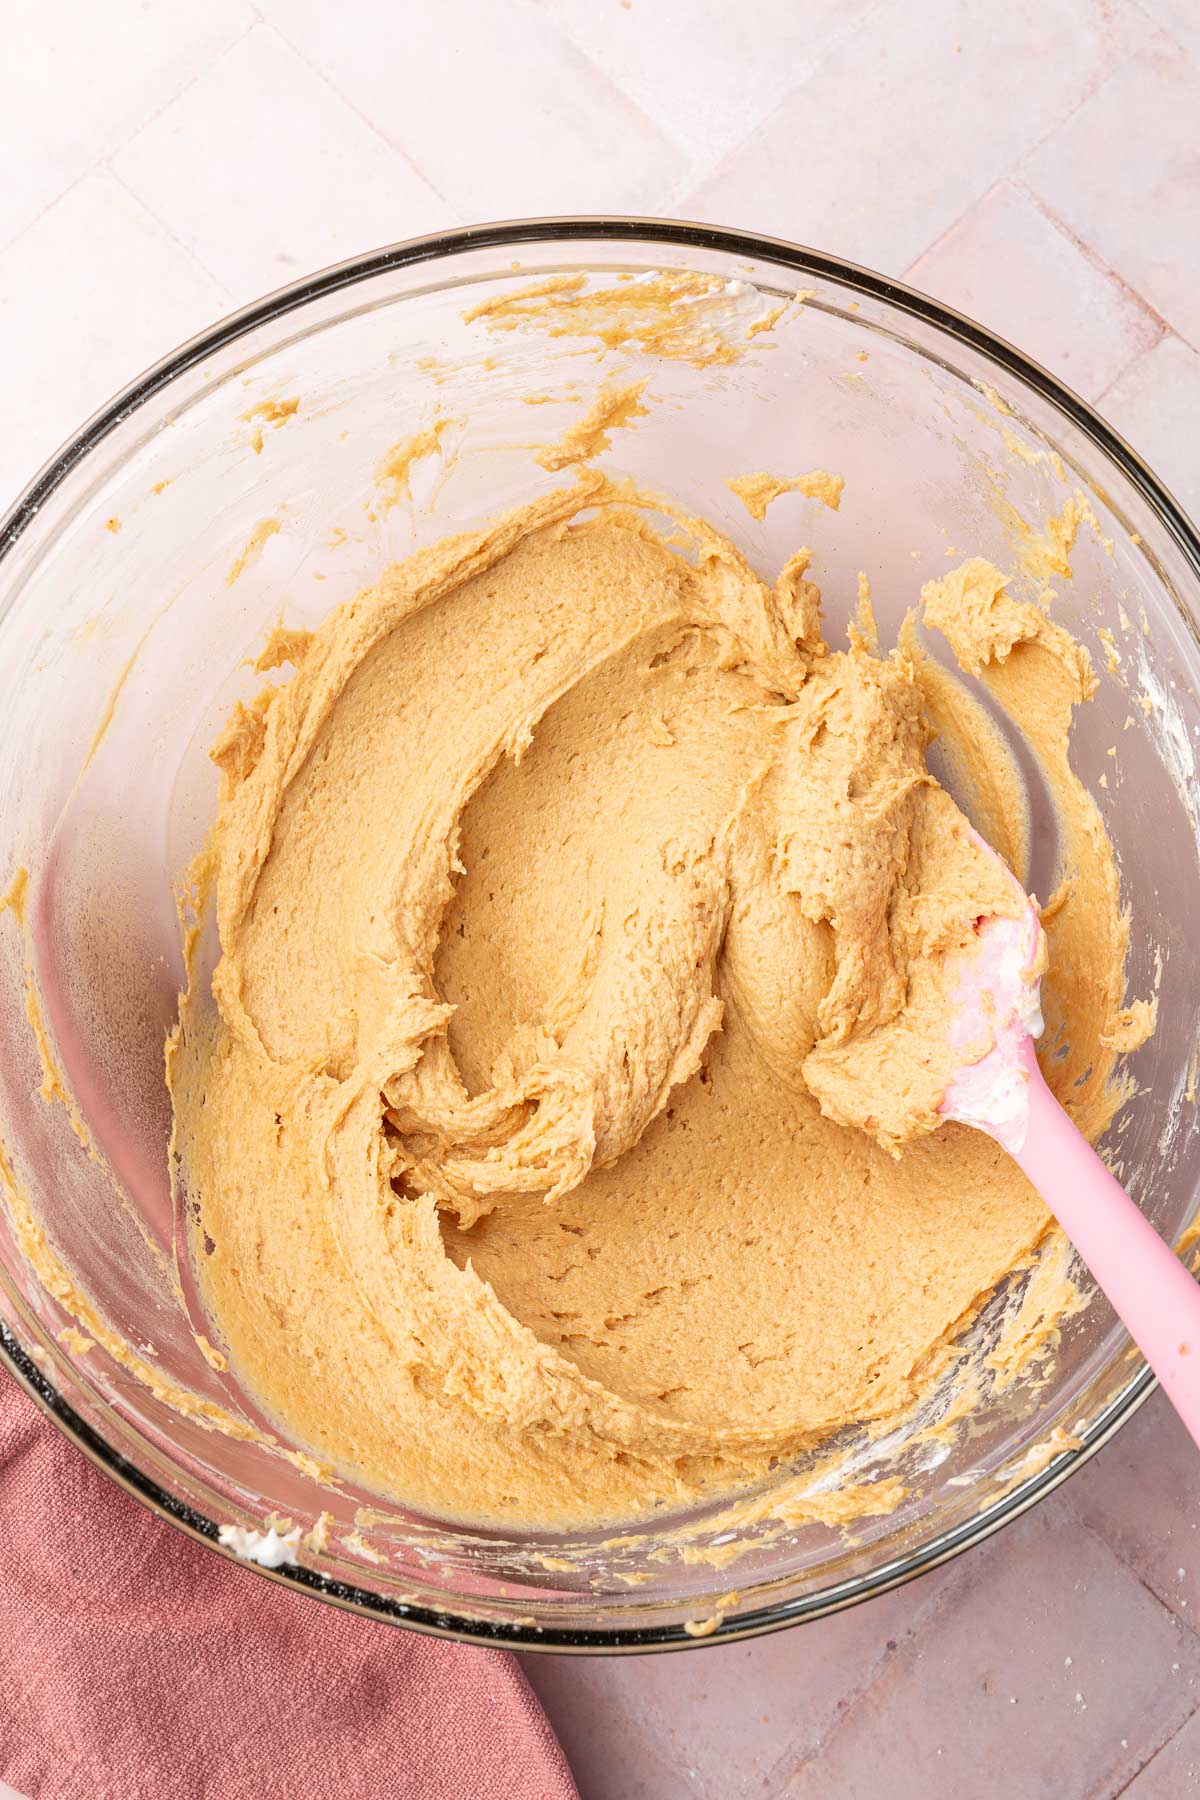 A glass mixing bowl with a fluffy peanut butter cream cheese filling in it with a pink spatula.